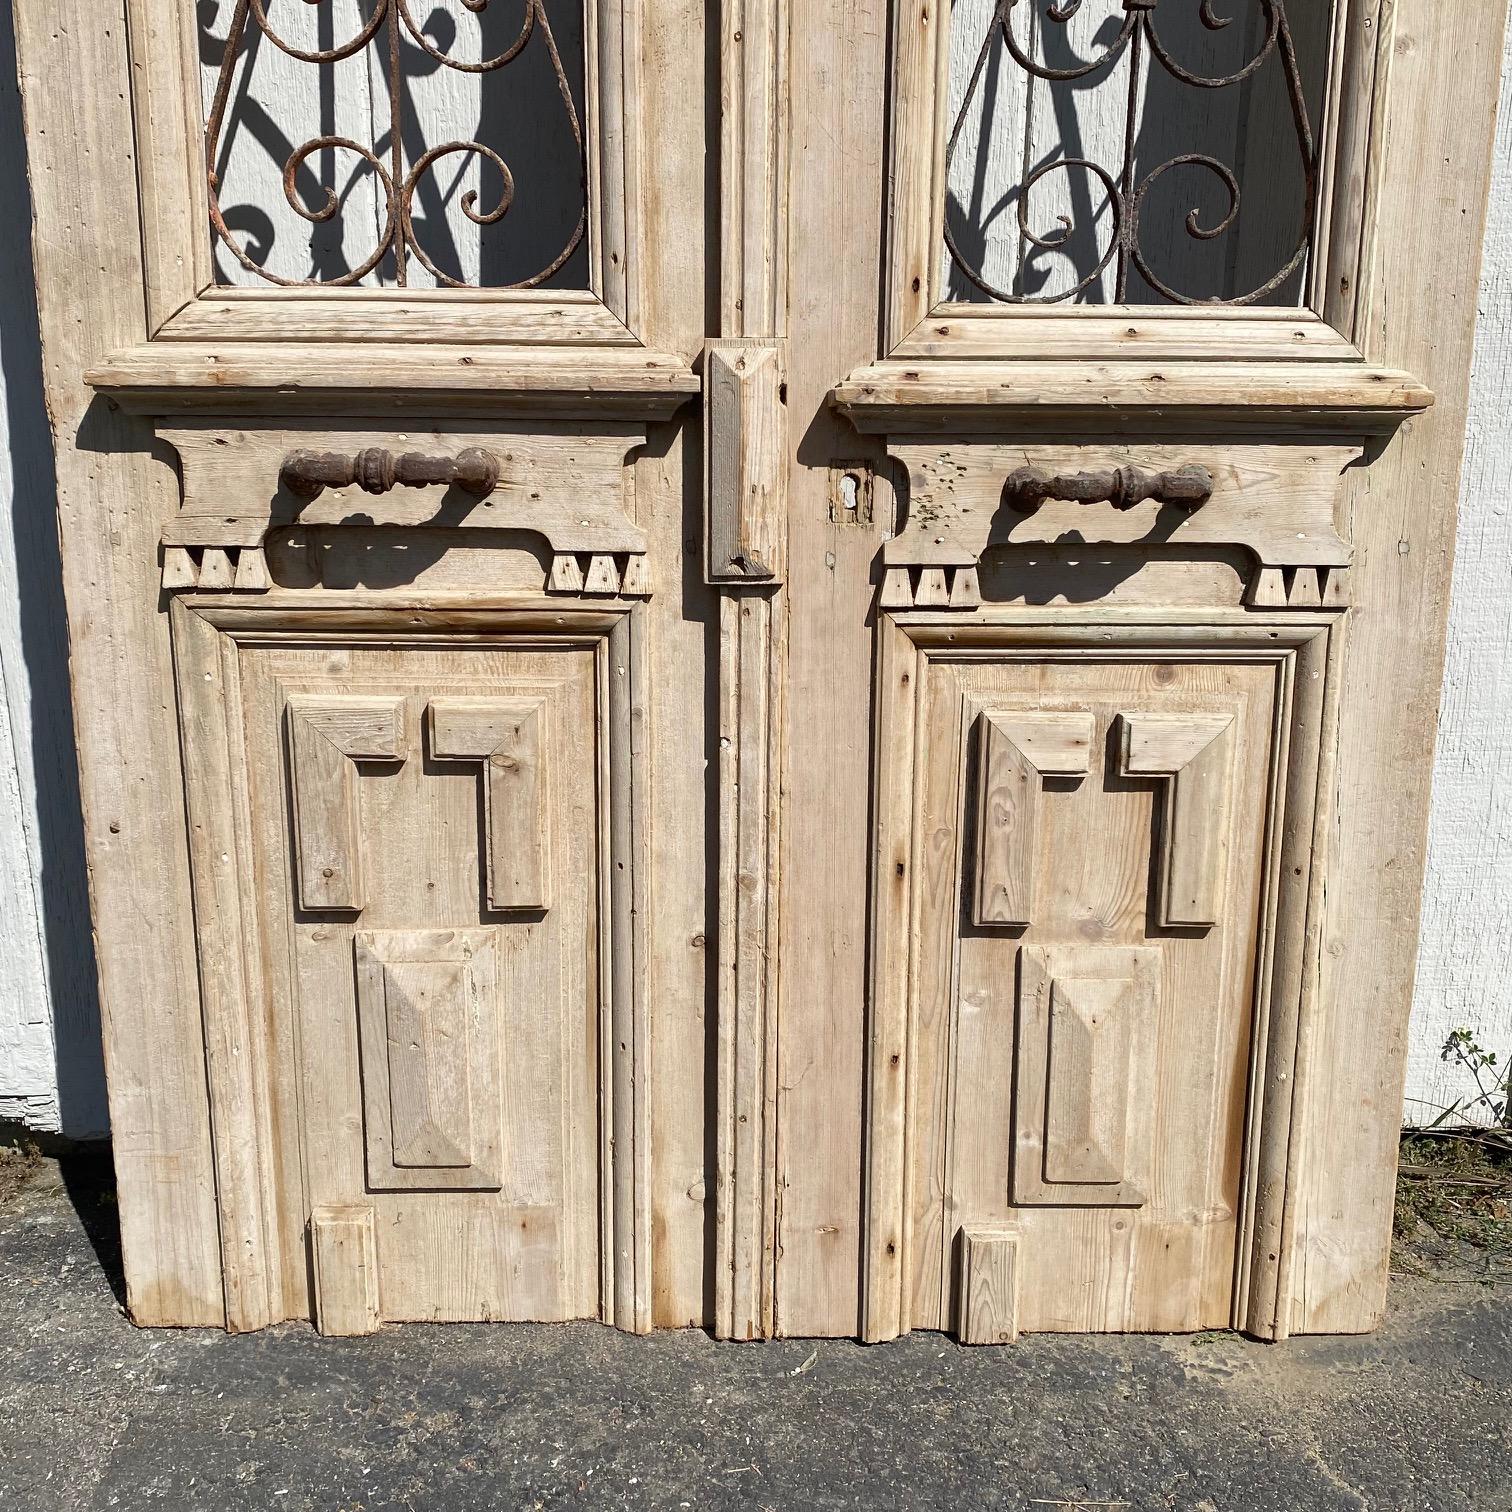 Pair of stunning stripped 19th century French doors with wrought iron, featuring bold molded detail framing the lower panels as well as the intricate wrought iron inserts above, which are artfully wrought in a beautiful geometric pattern. Original